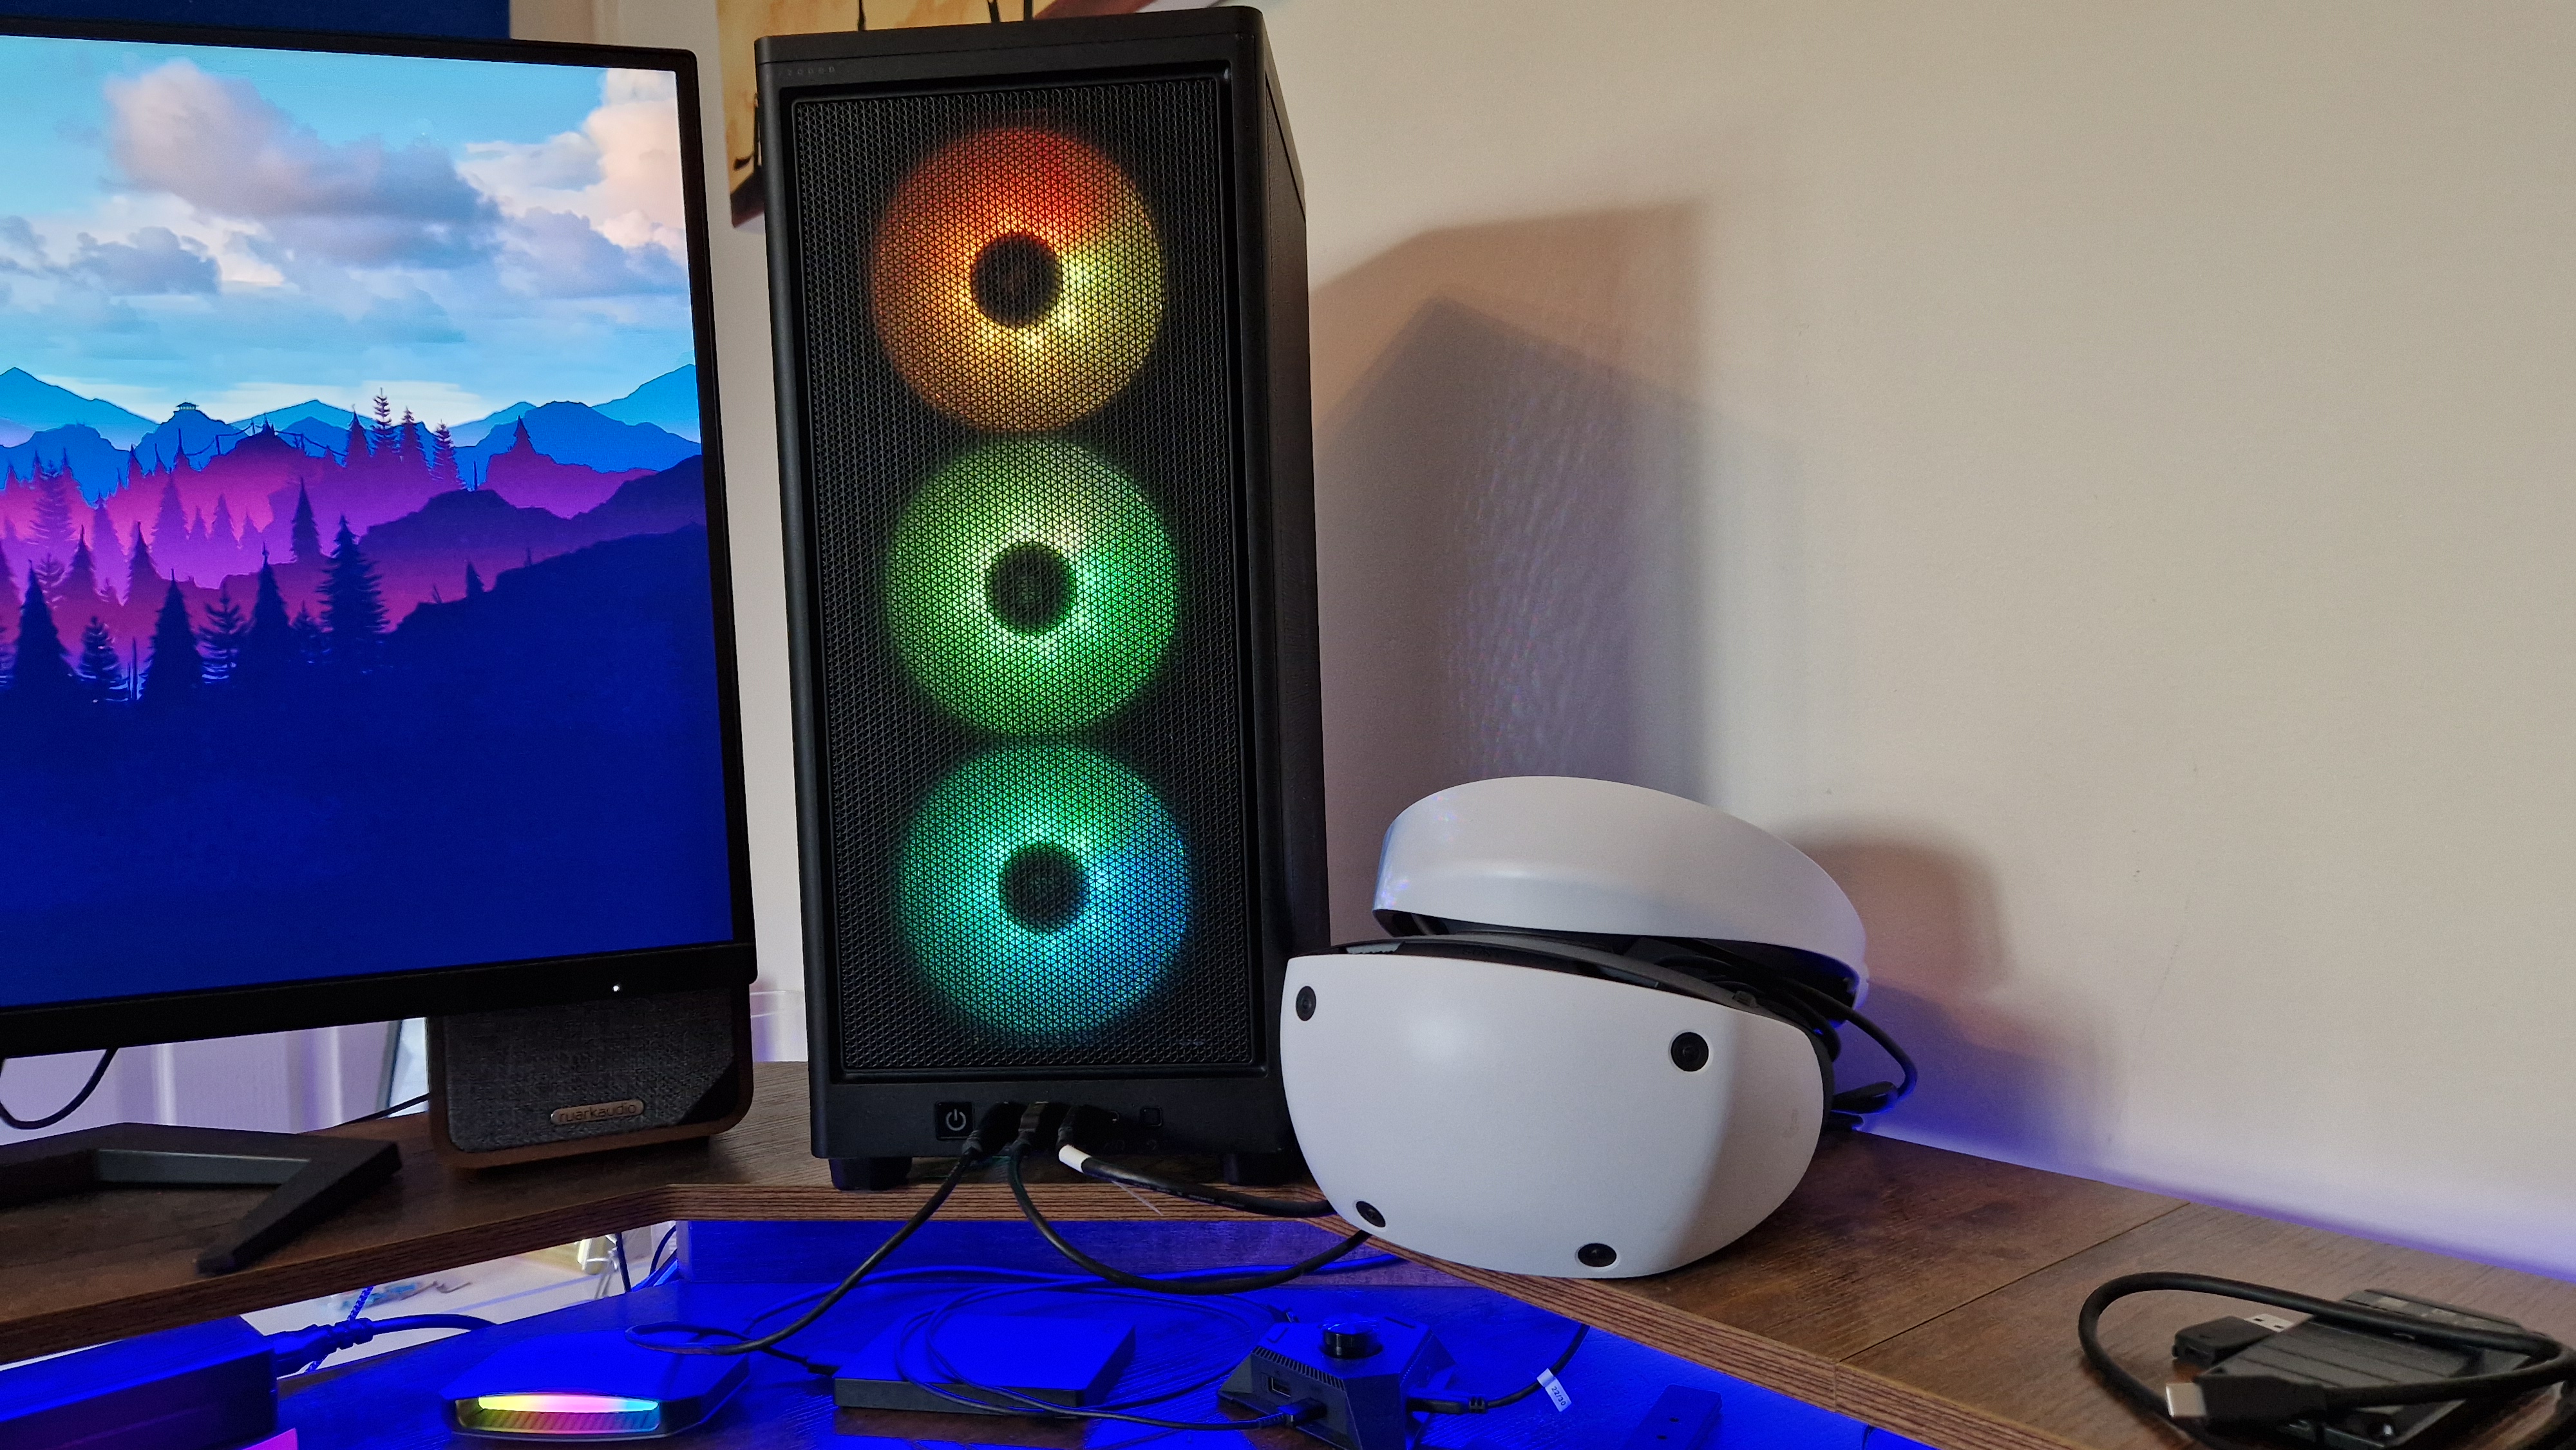 PSVR 2 next to a gaming PC